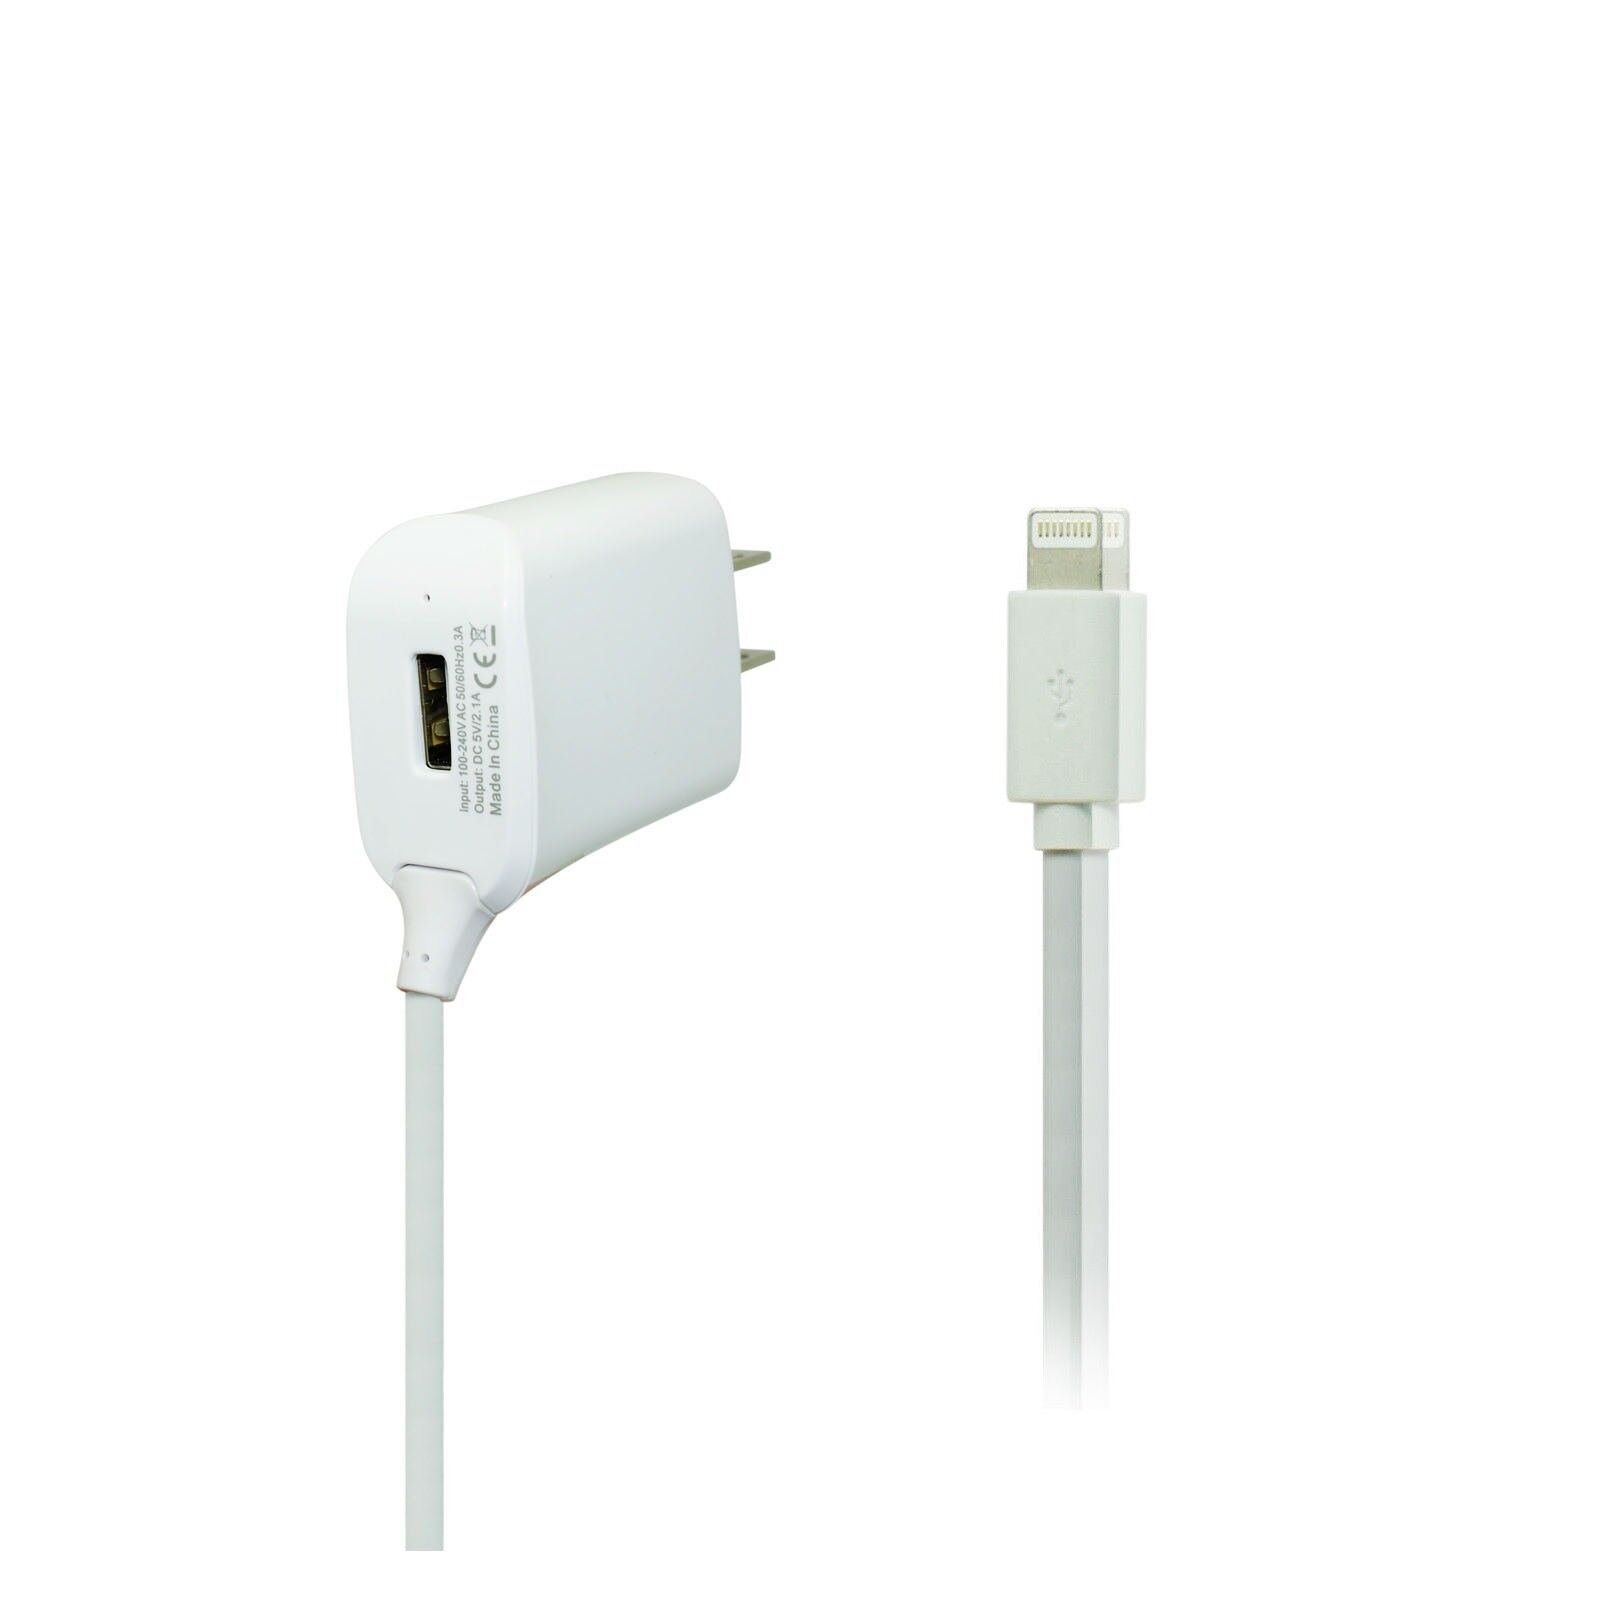 Wall AC Home Charger with Extra USB Port for Apple iPad (9th generation) 2021